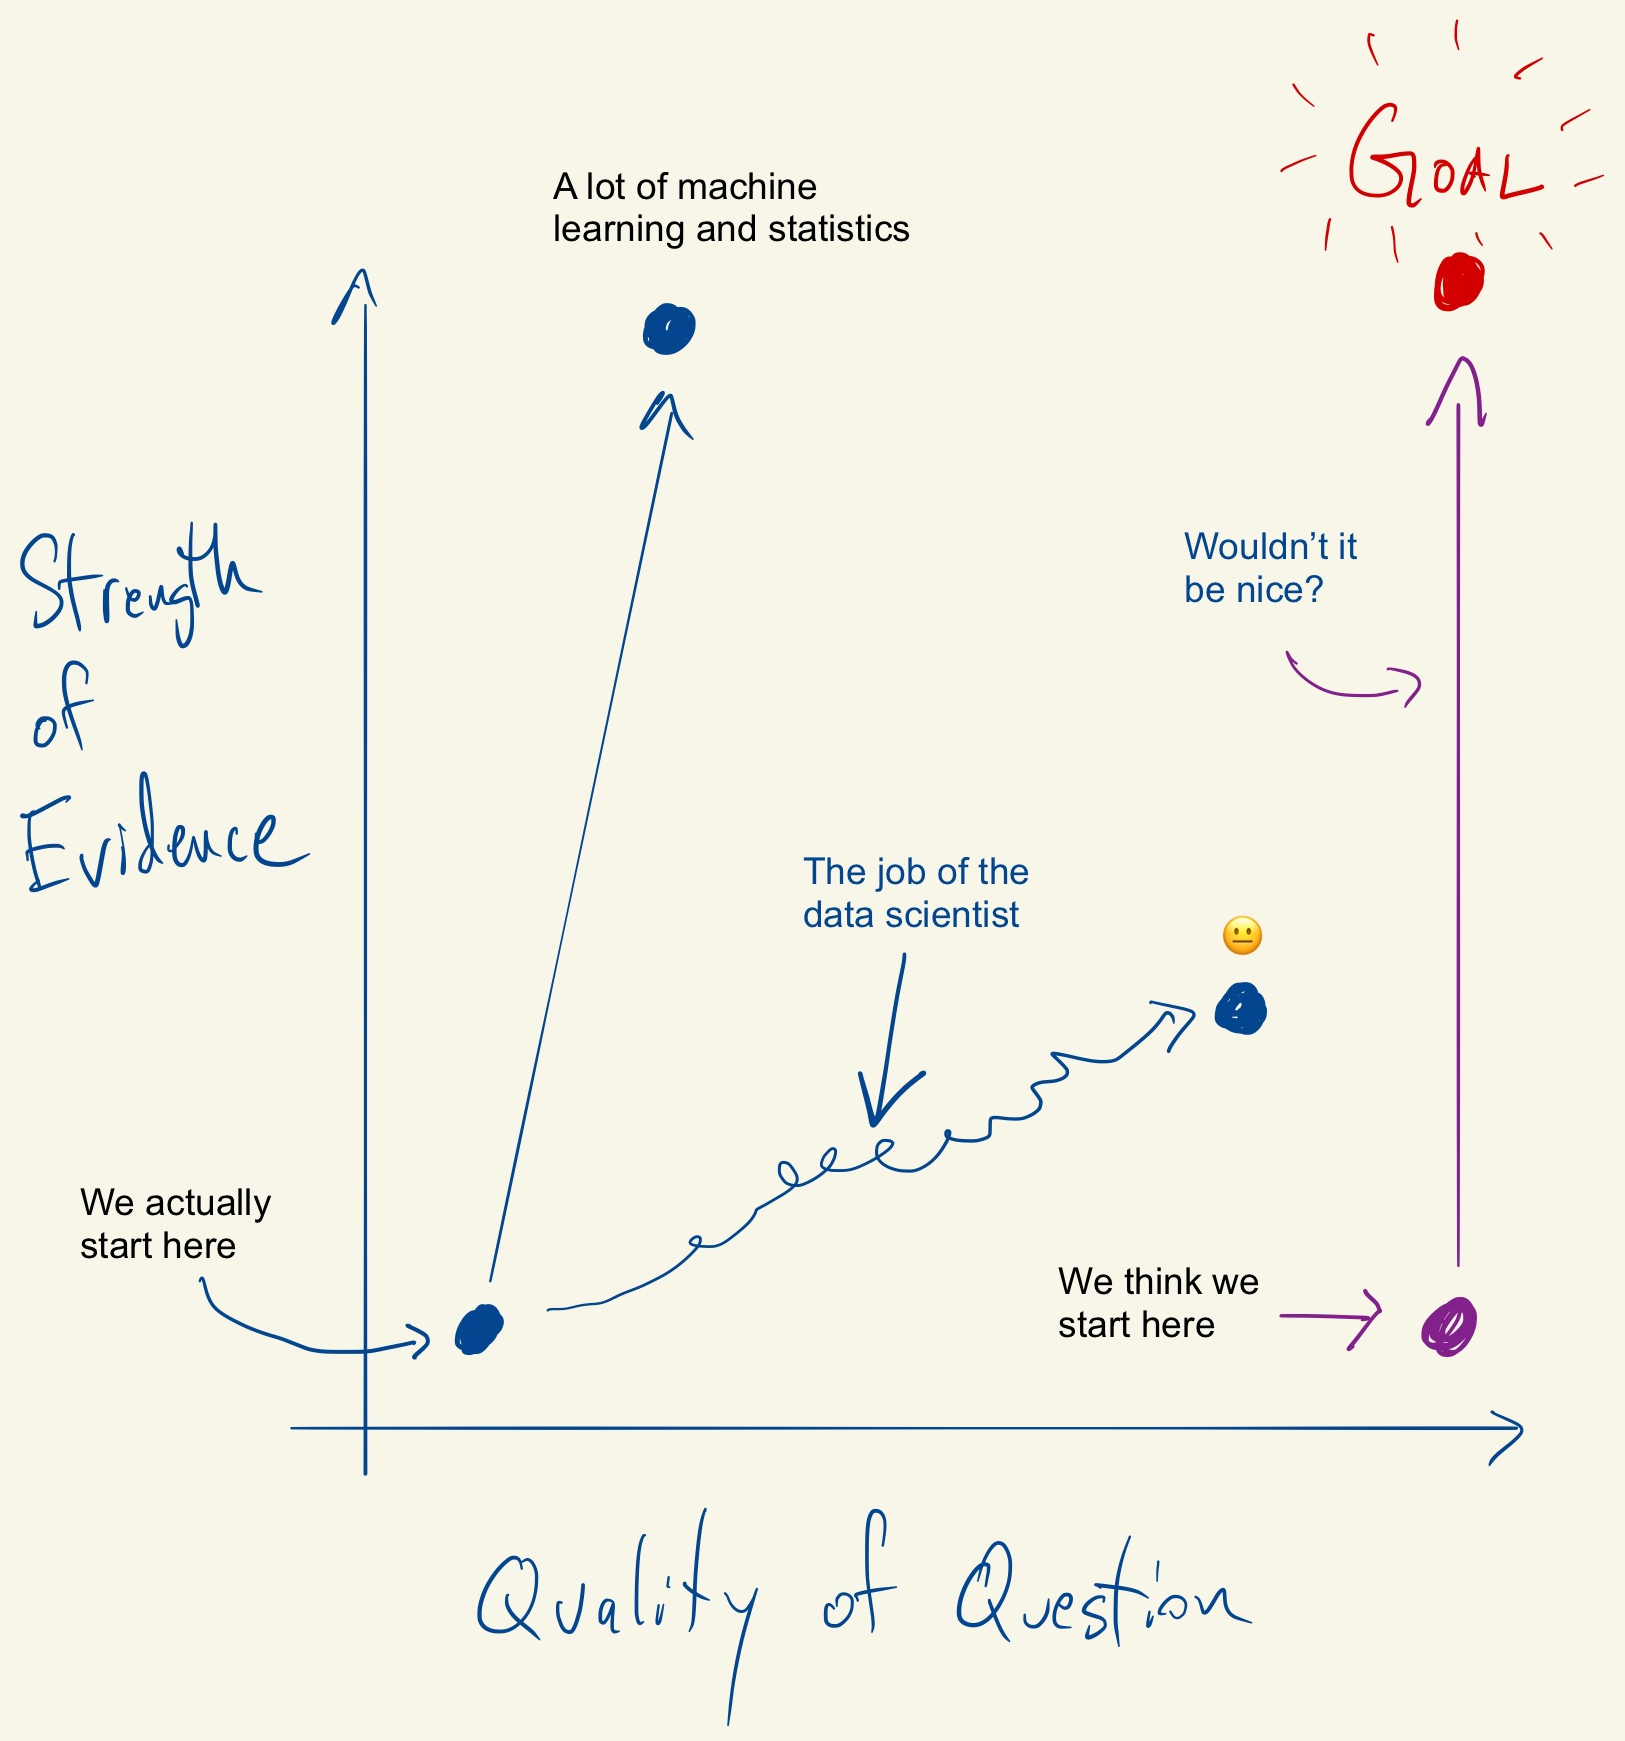 Strength of Evidence vs. Quality of Question